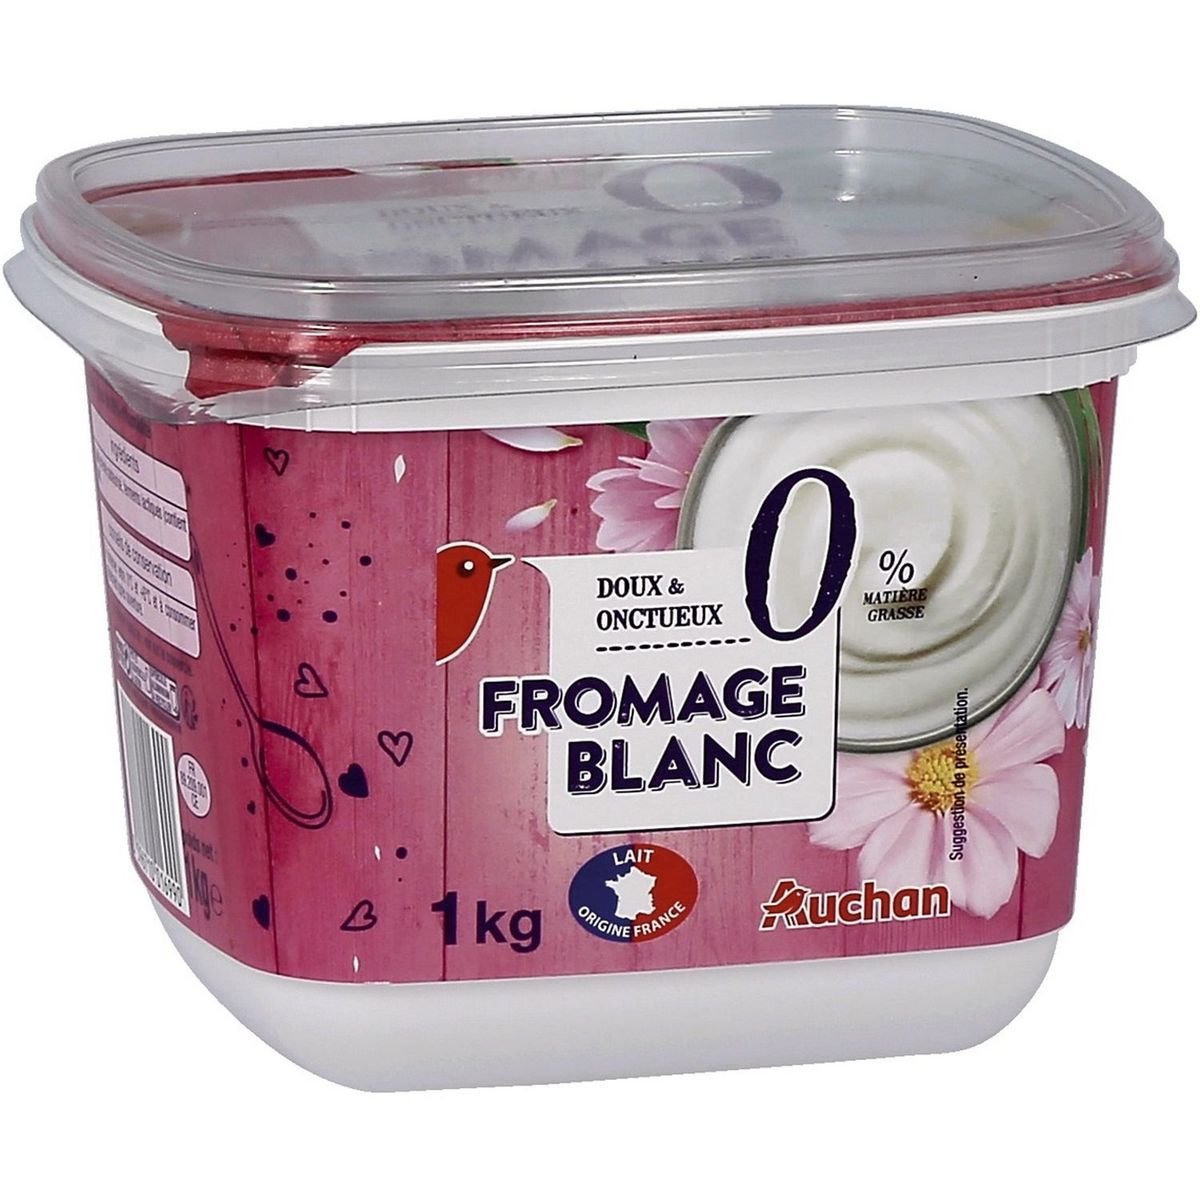  FROMAGE BLANC AUCHAN